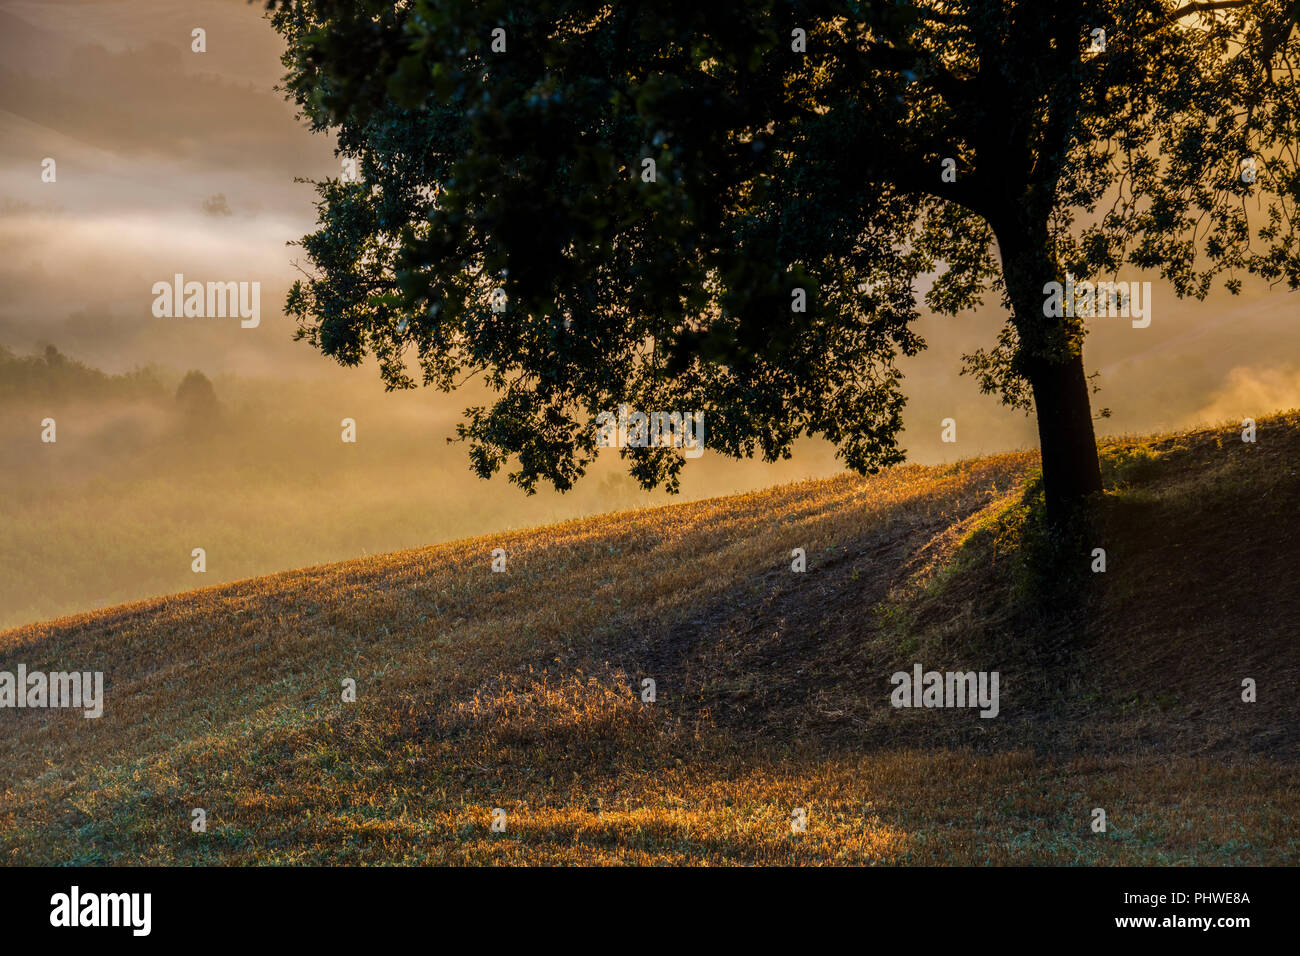 An early mornig view of rolling hills and trees near Buonconvento, Tuscany, Italy. Stock Photo